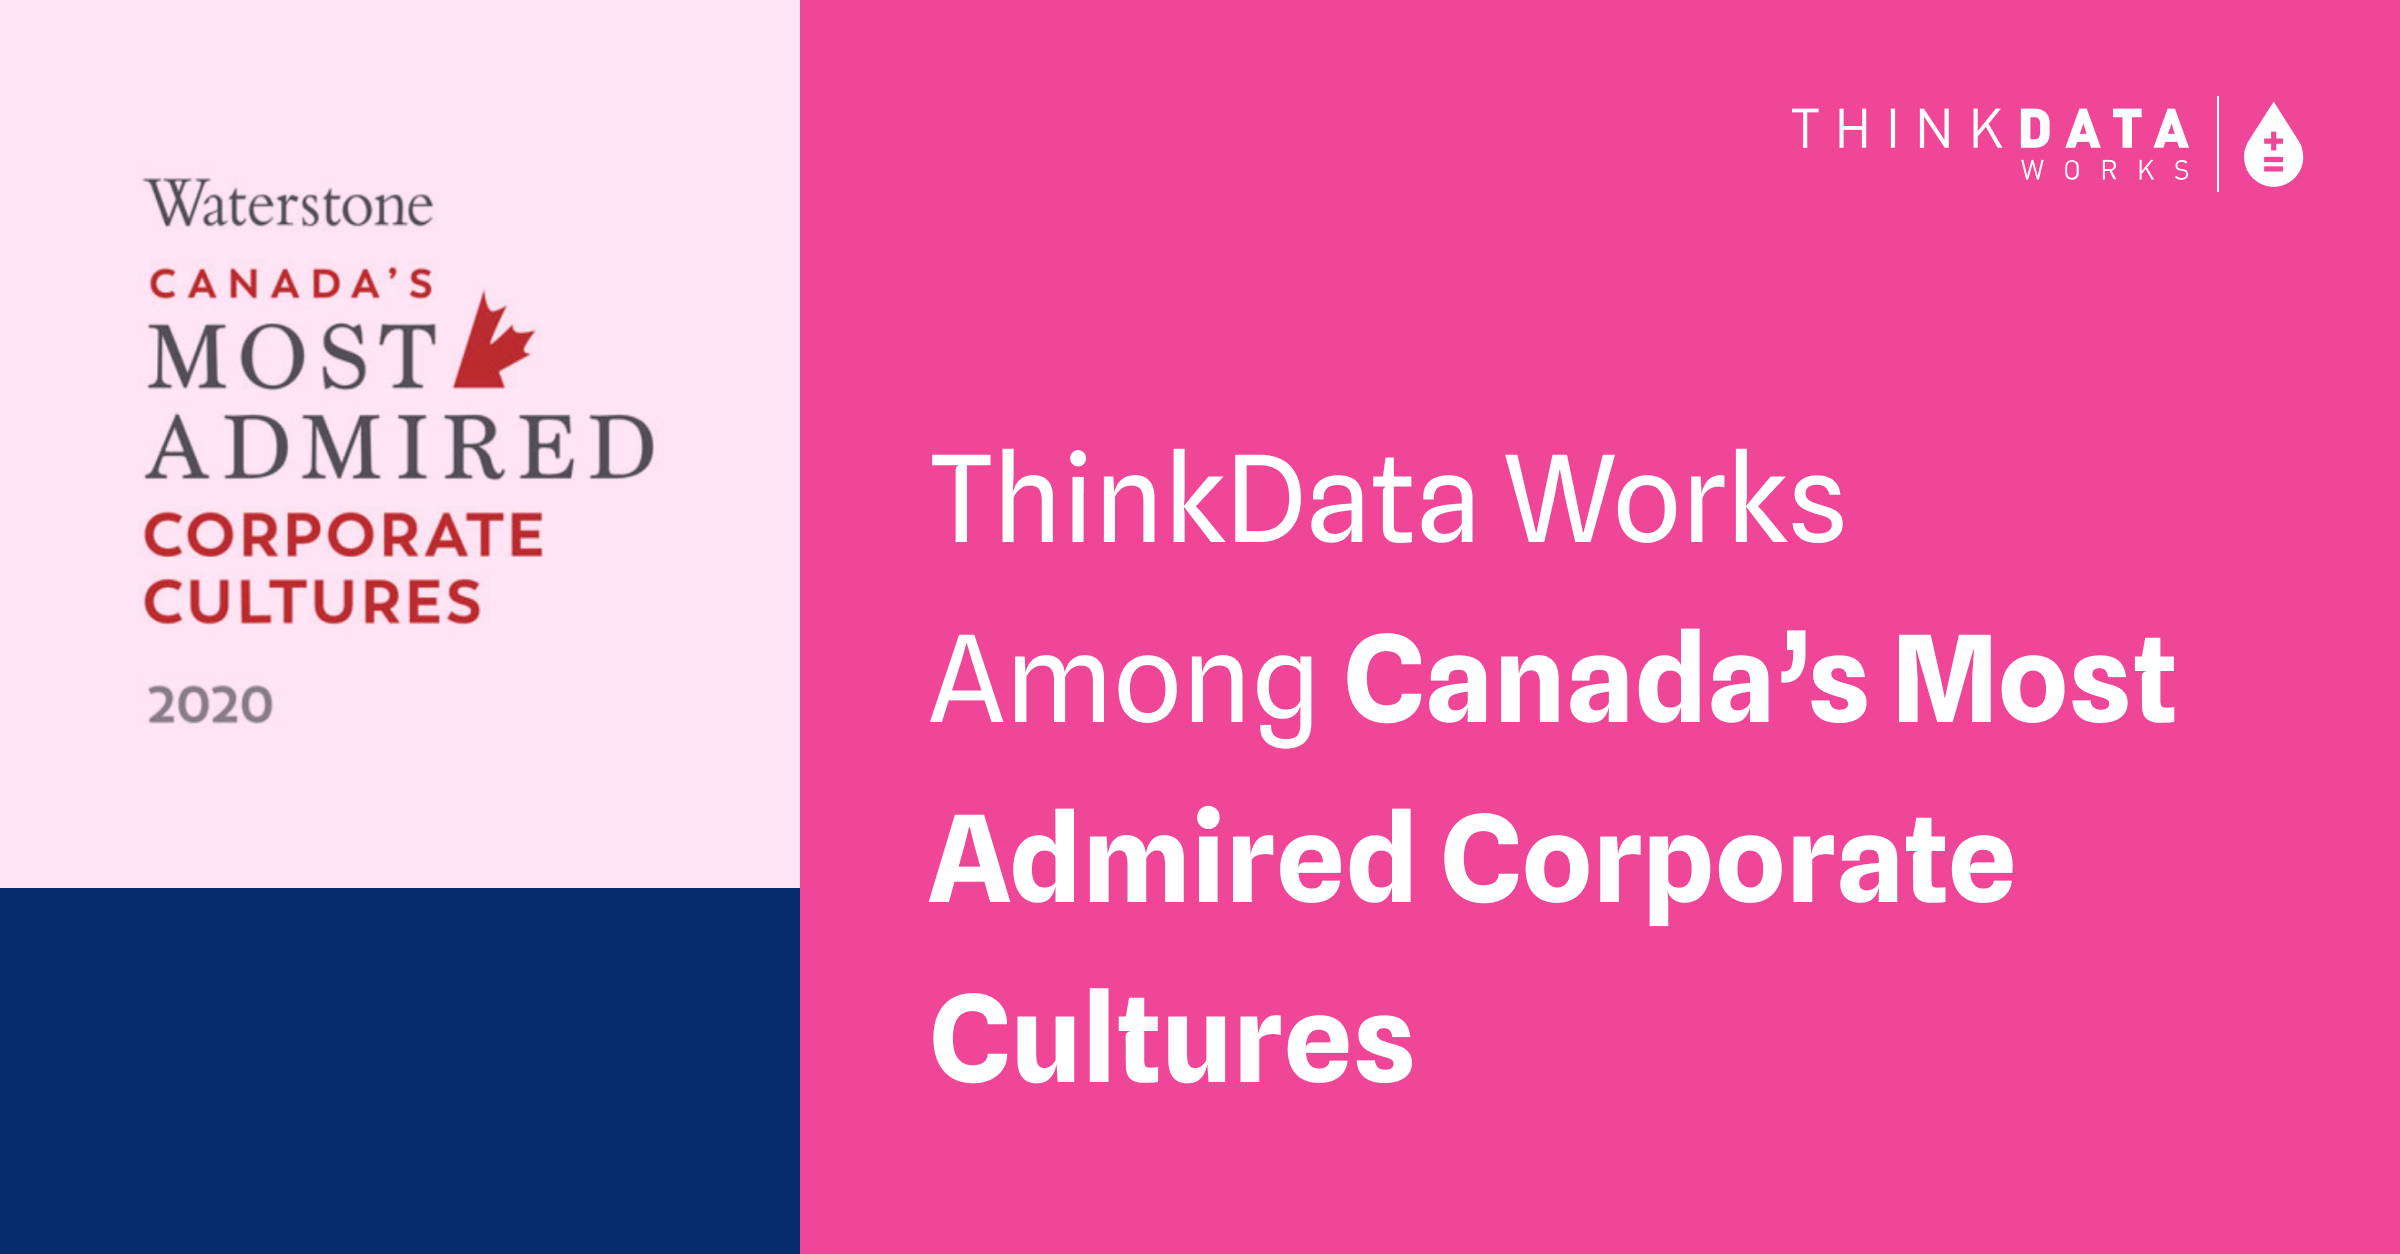 ThinkData Works awarded Canada's Most Admired Corporate Cultures from Waterstone